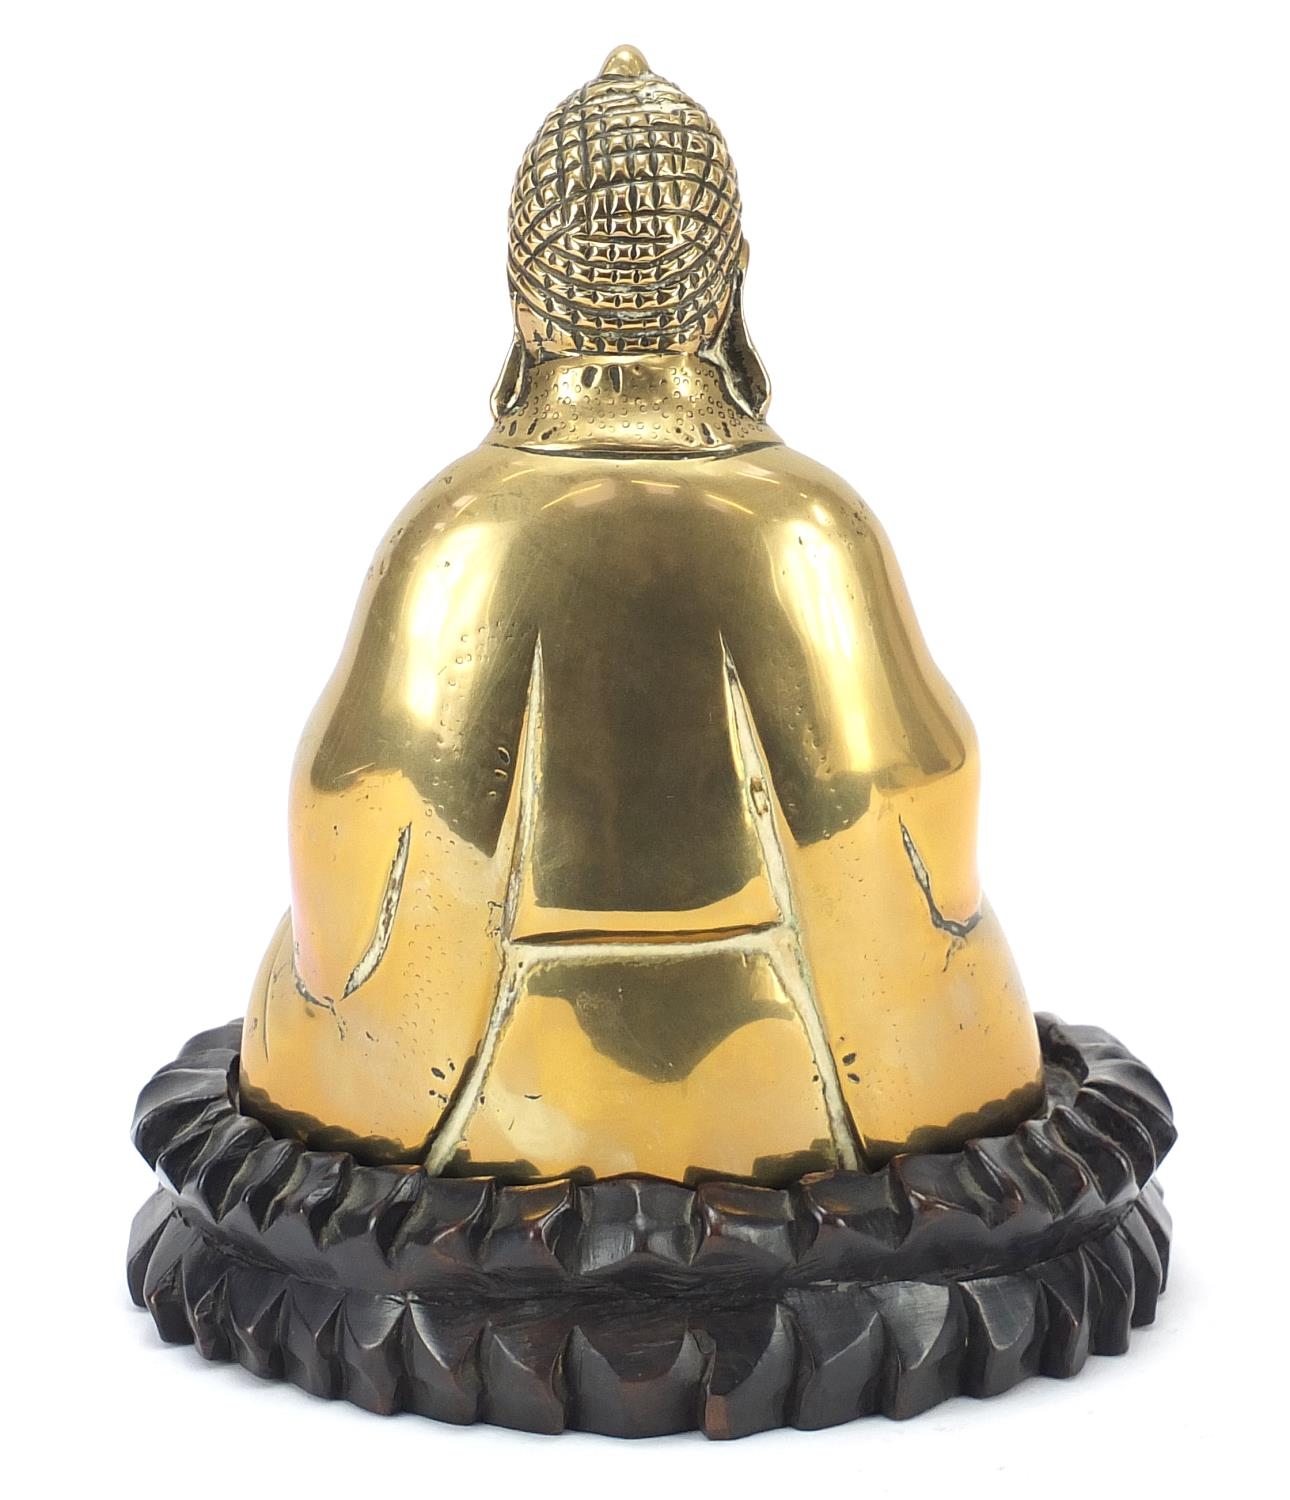 Chinese bronzed figure of Buddha raised on a carved hardwood lotus stand, 23.5cm high - Image 4 of 7